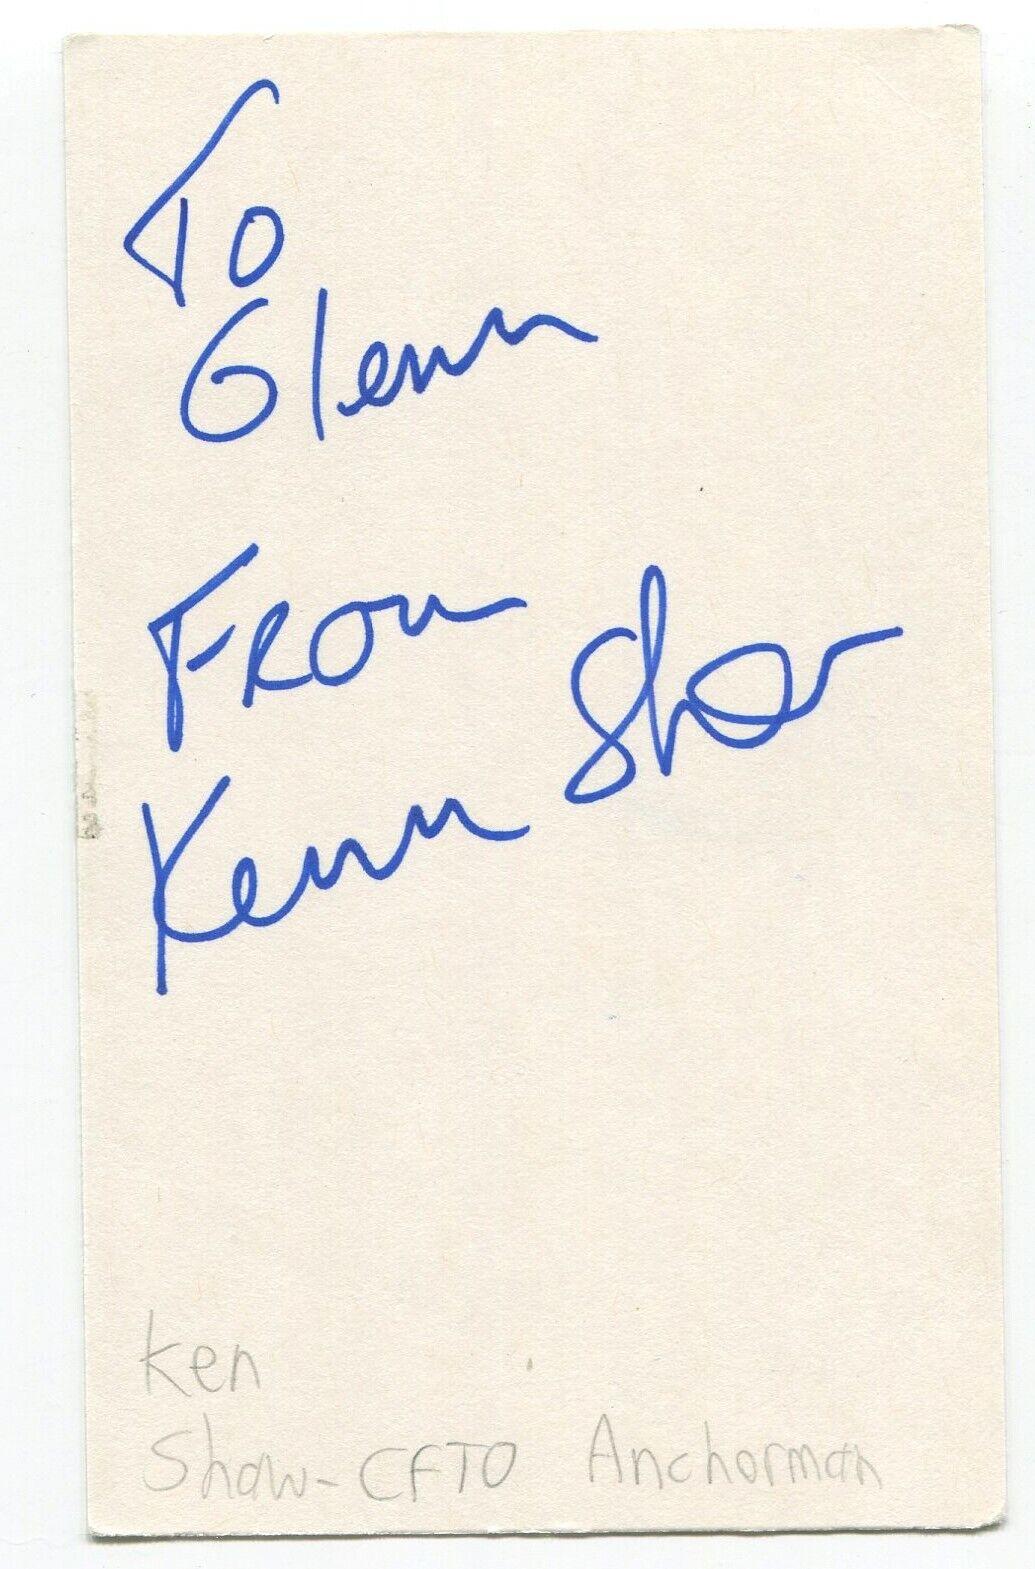 Ken Shaw Signed 3x5 Index Card Autographed Signature Canadian Journalist